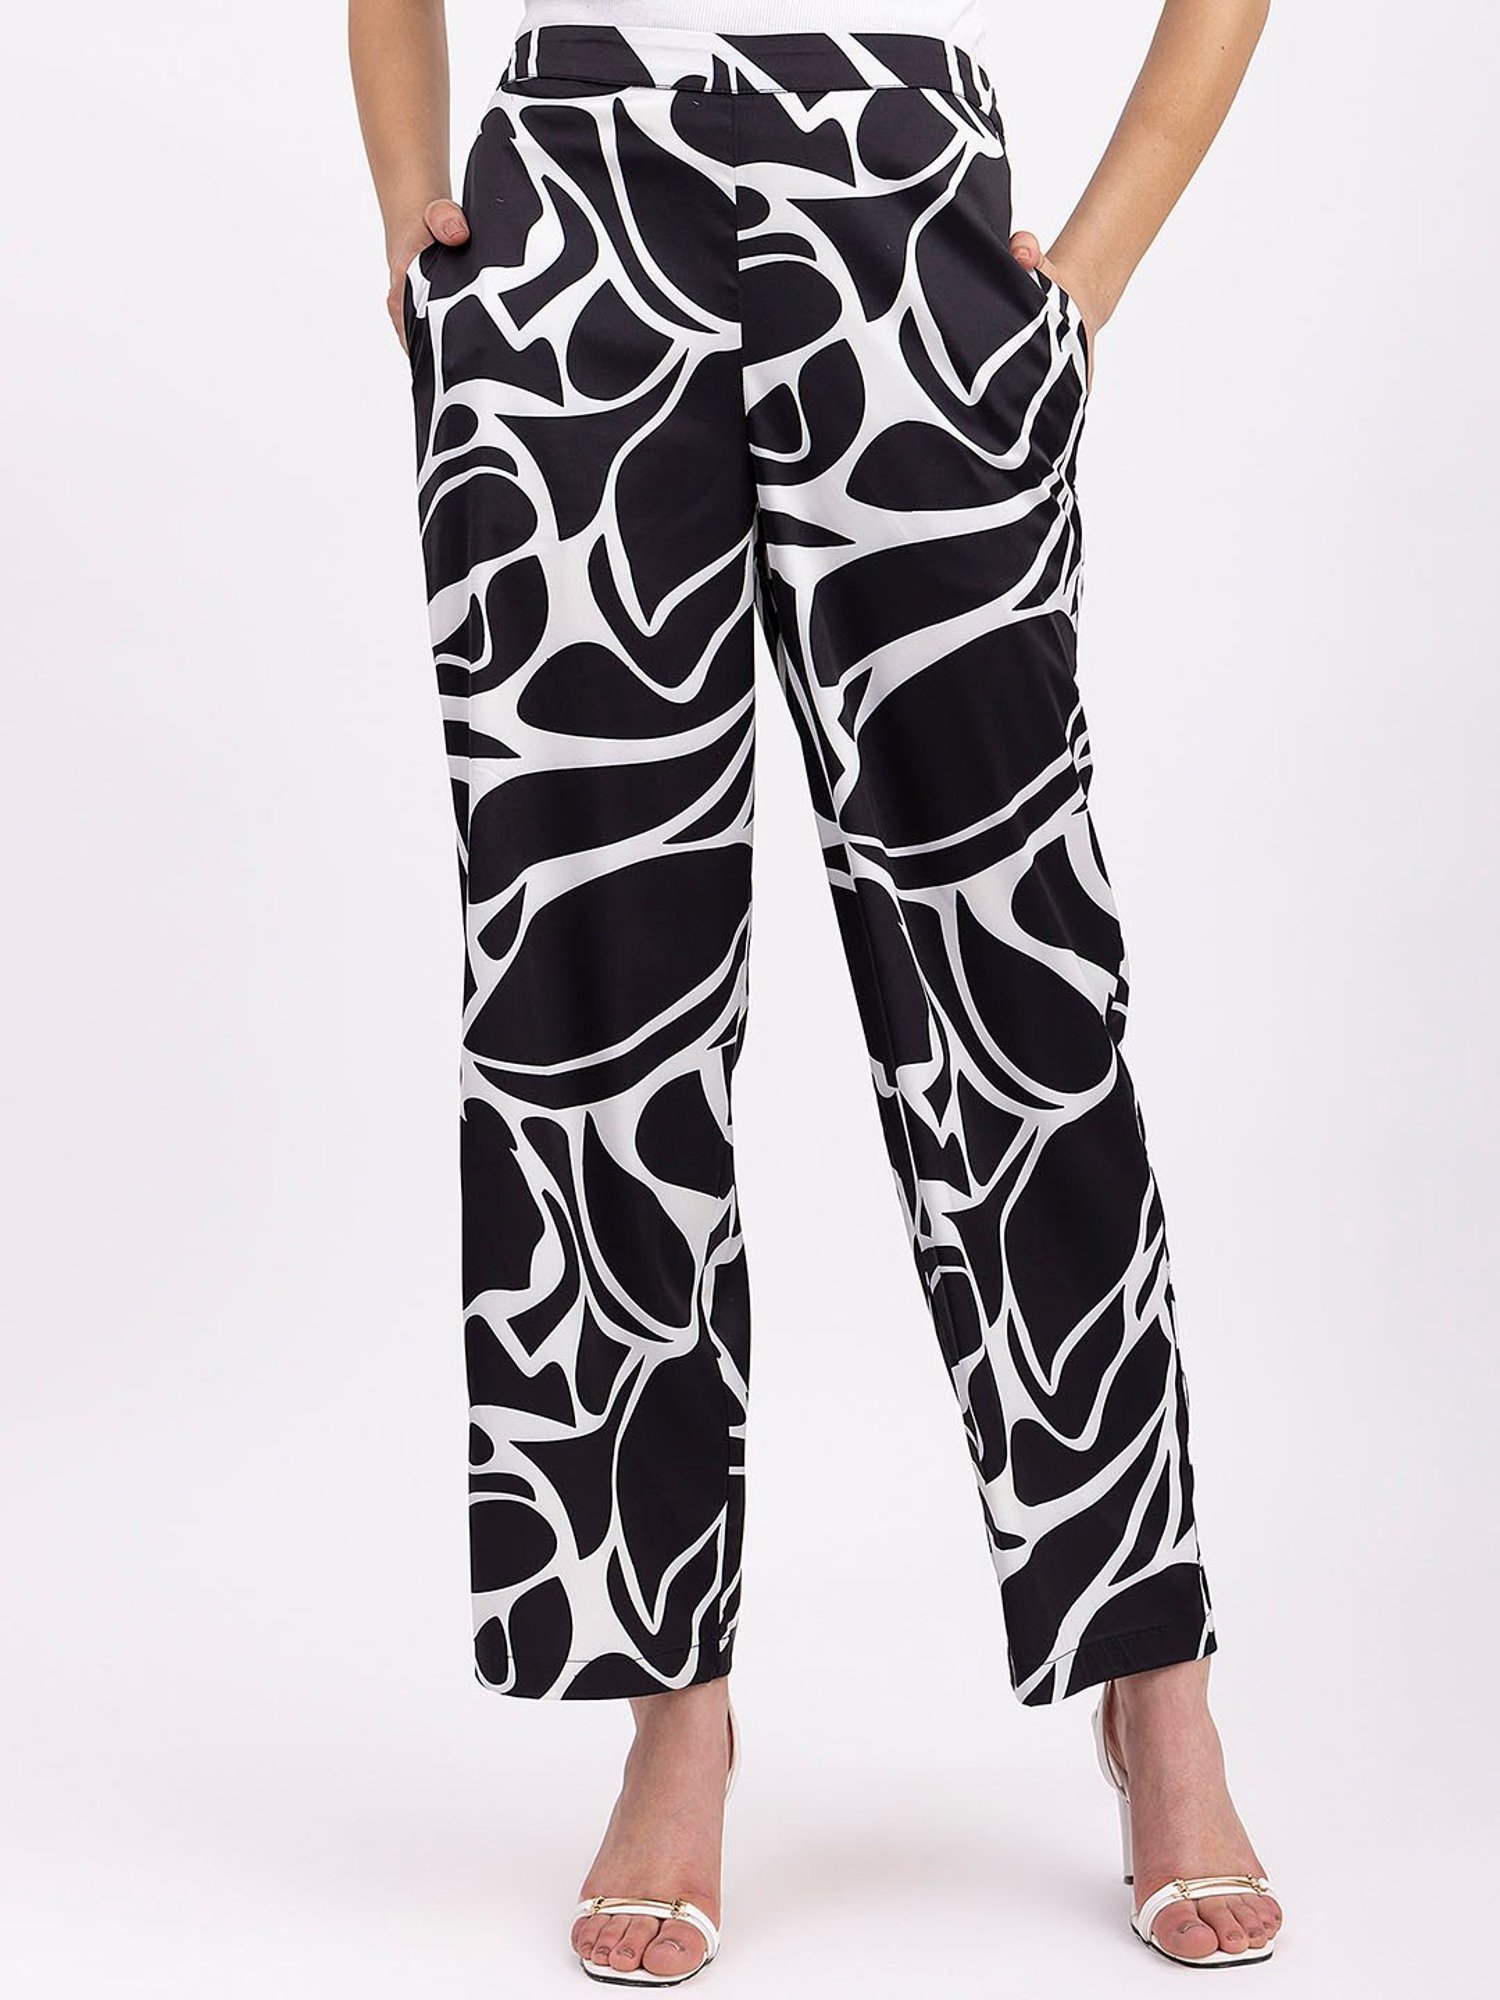 Flared trousers - Black/Patterned - Ladies | H&M IN